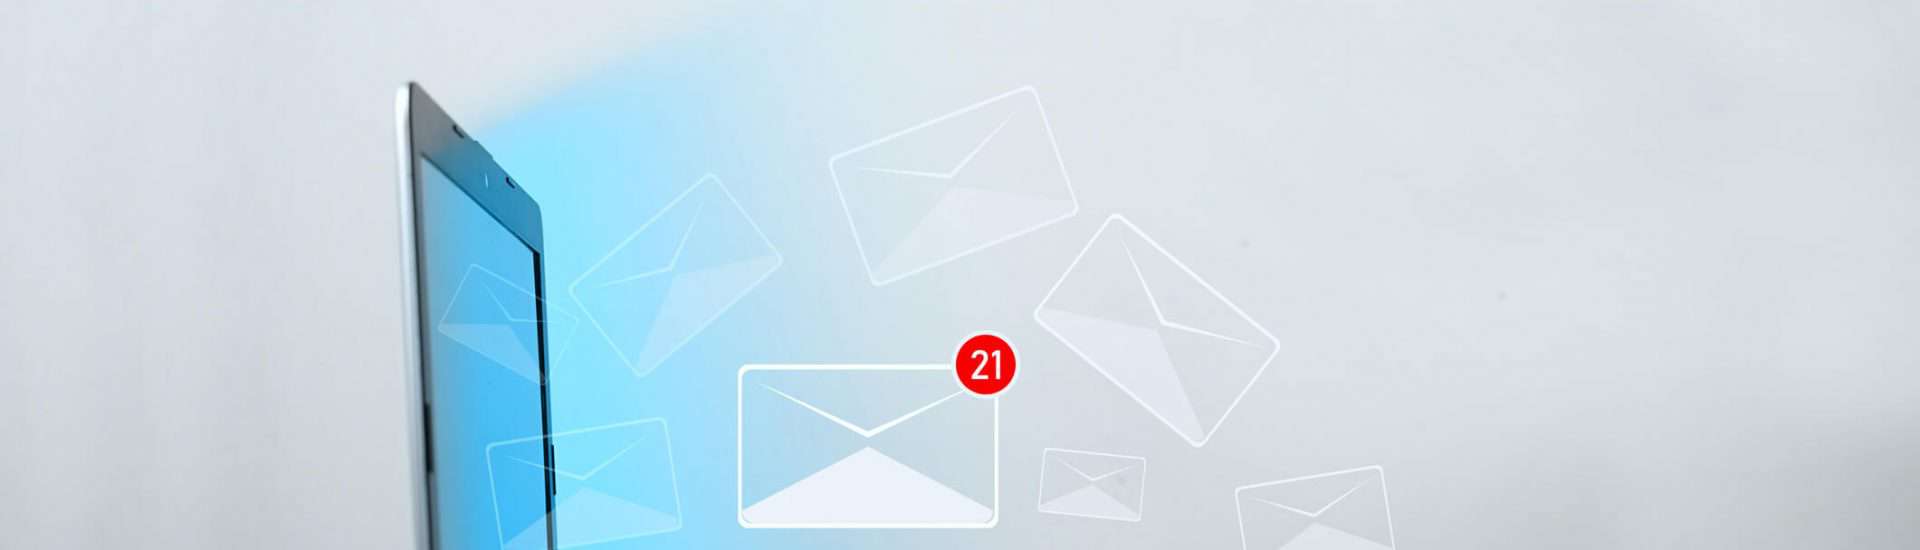 Are emails a relic? Not necessarily!